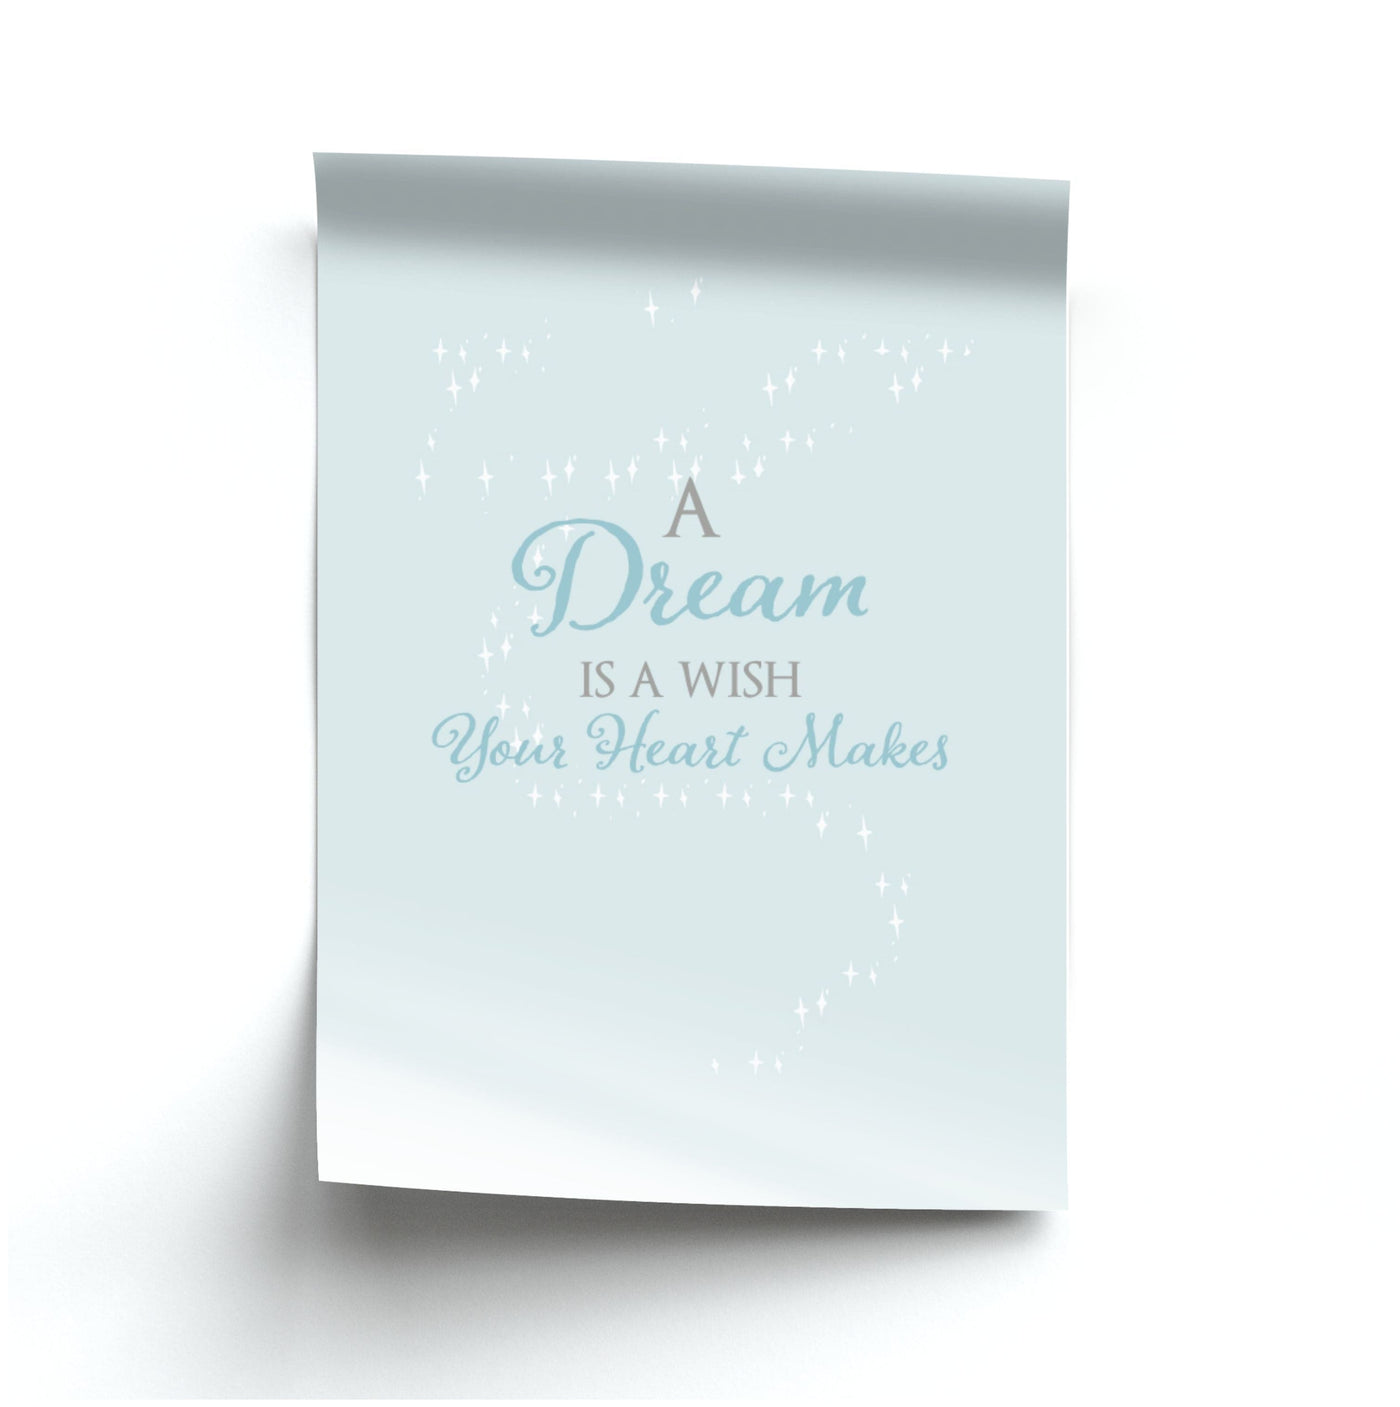 A Dream Is A Wish Your Heart Makes - Disney Poster